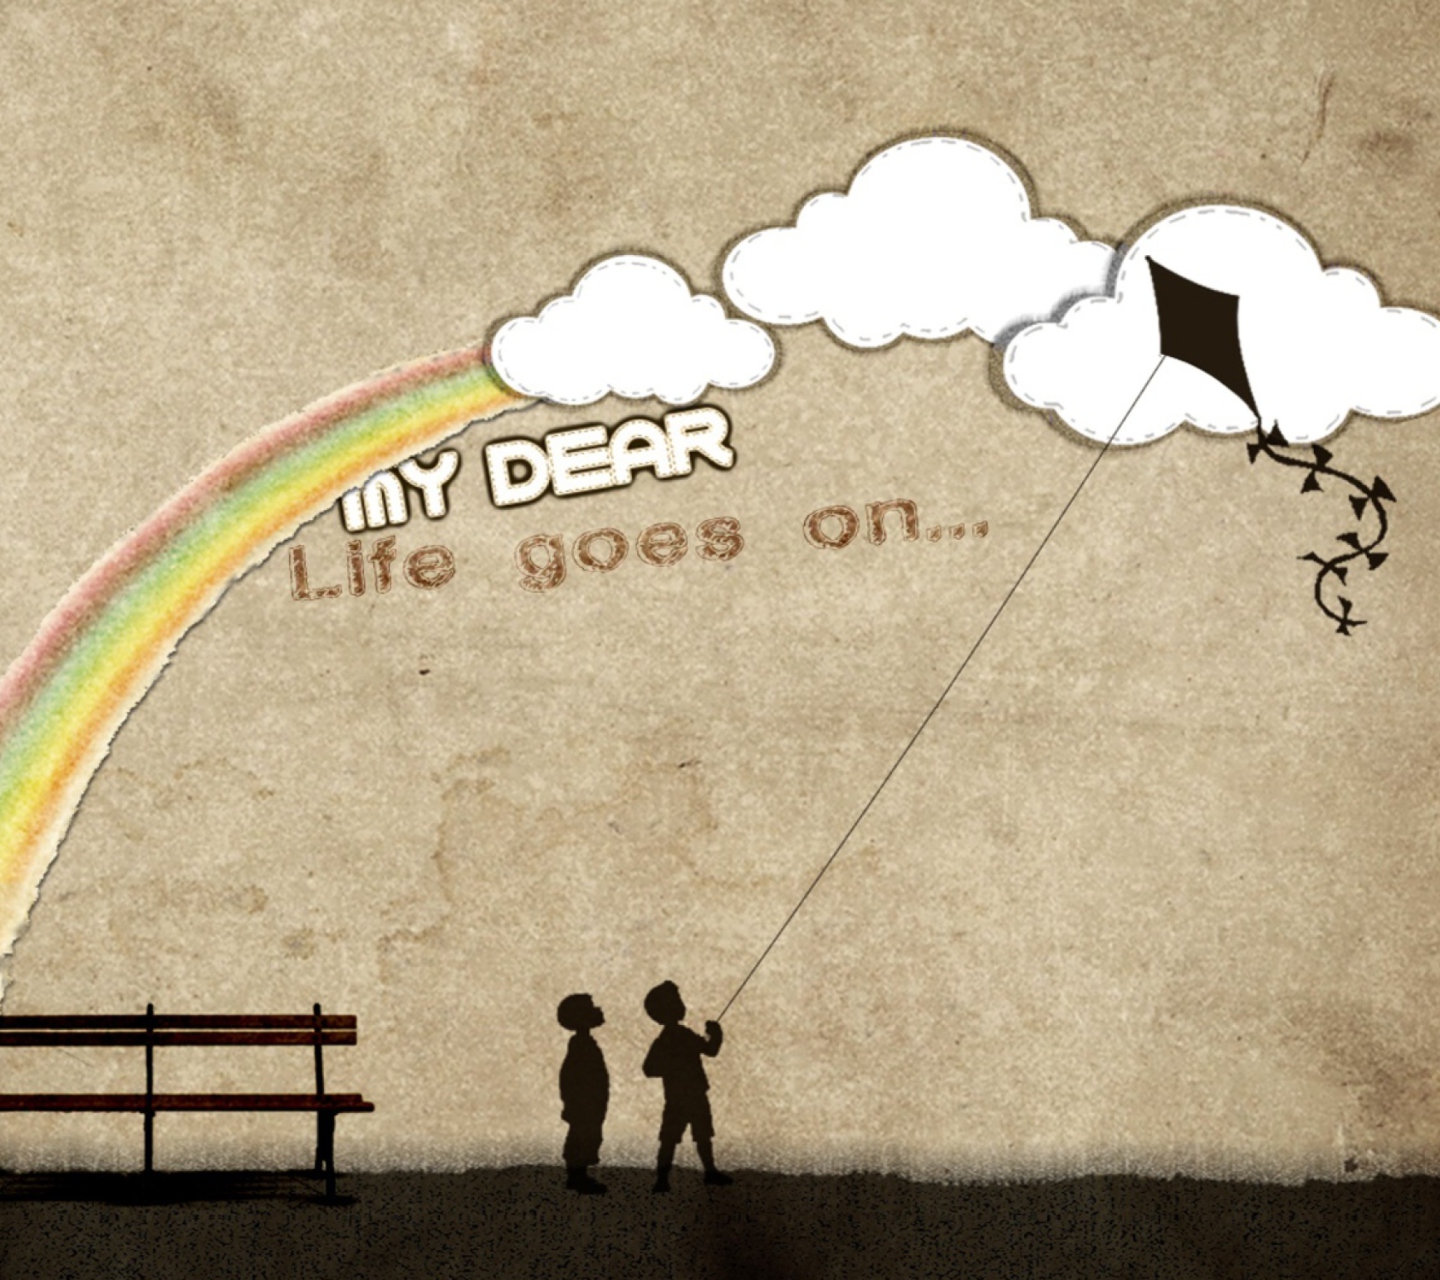 Life Goes On wallpaper 1440x1280